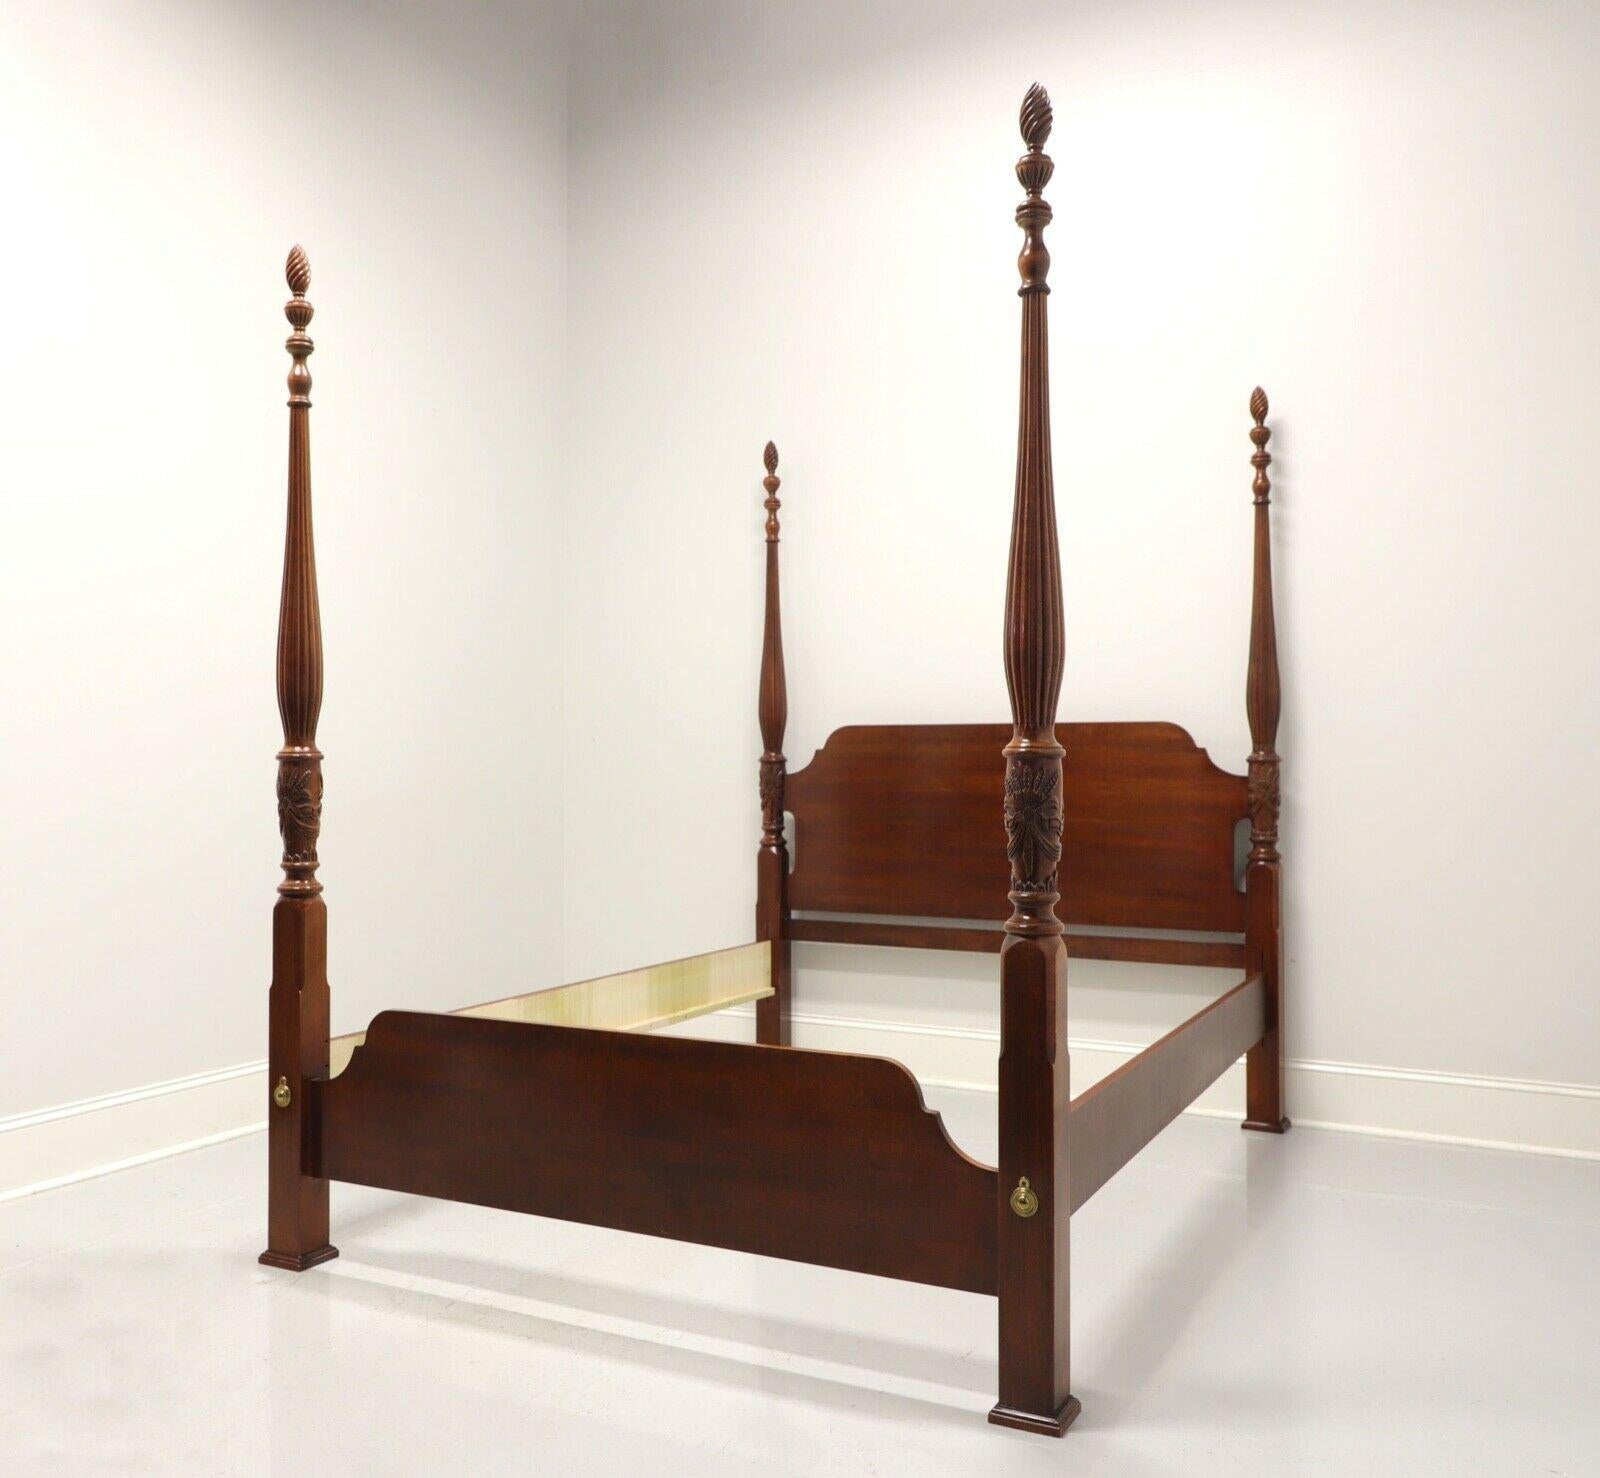 A Traditional style queen size rice bed, unbranded, similar quality to Drexel. Hardwood with cherry finish, four rice carved motif posts with finials and brass covers to footboard. Three wood slats rest on side rails for mattress support. Side rails